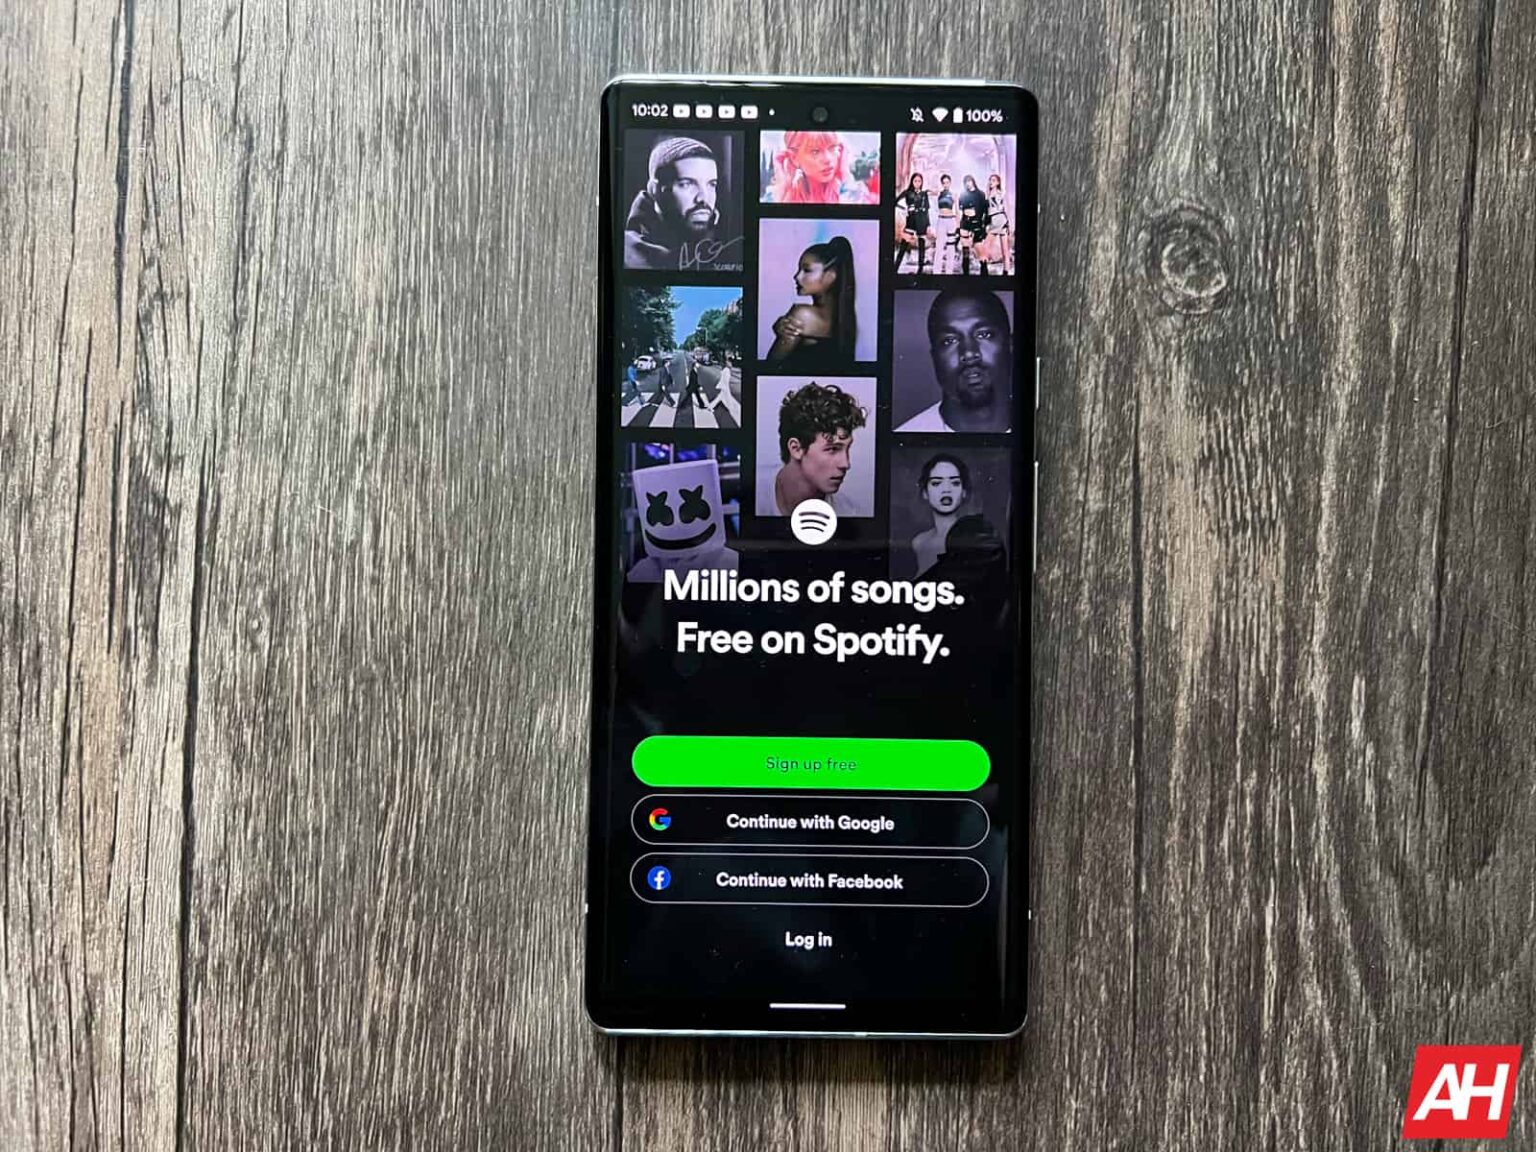 Spotify may soon launch its lossless audio feature